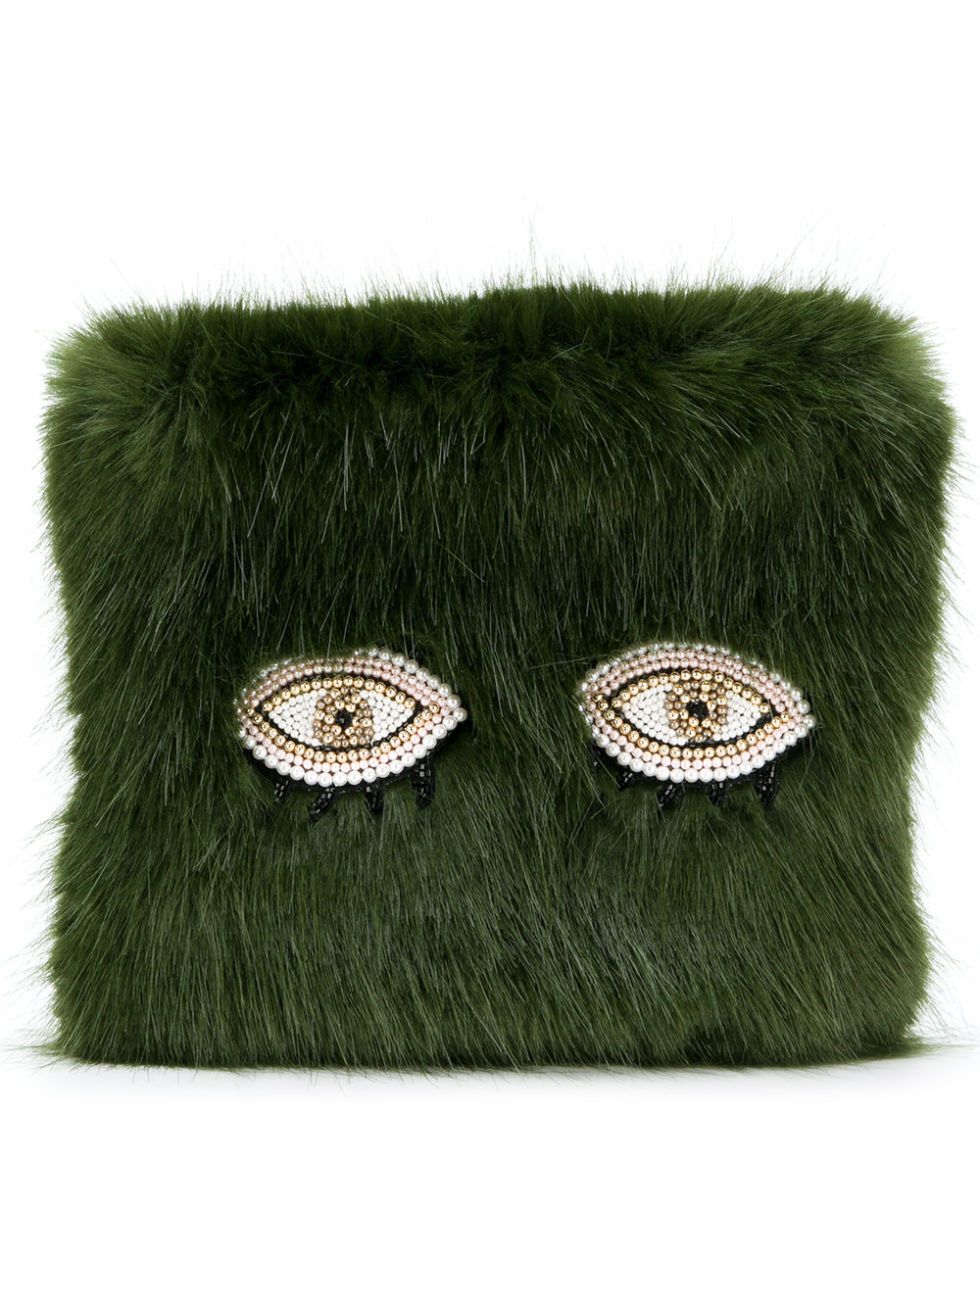 Fur, Green, Wool, Textile, Grass, Fashion accessory, Coin purse, Costume accessory, Natural material, 